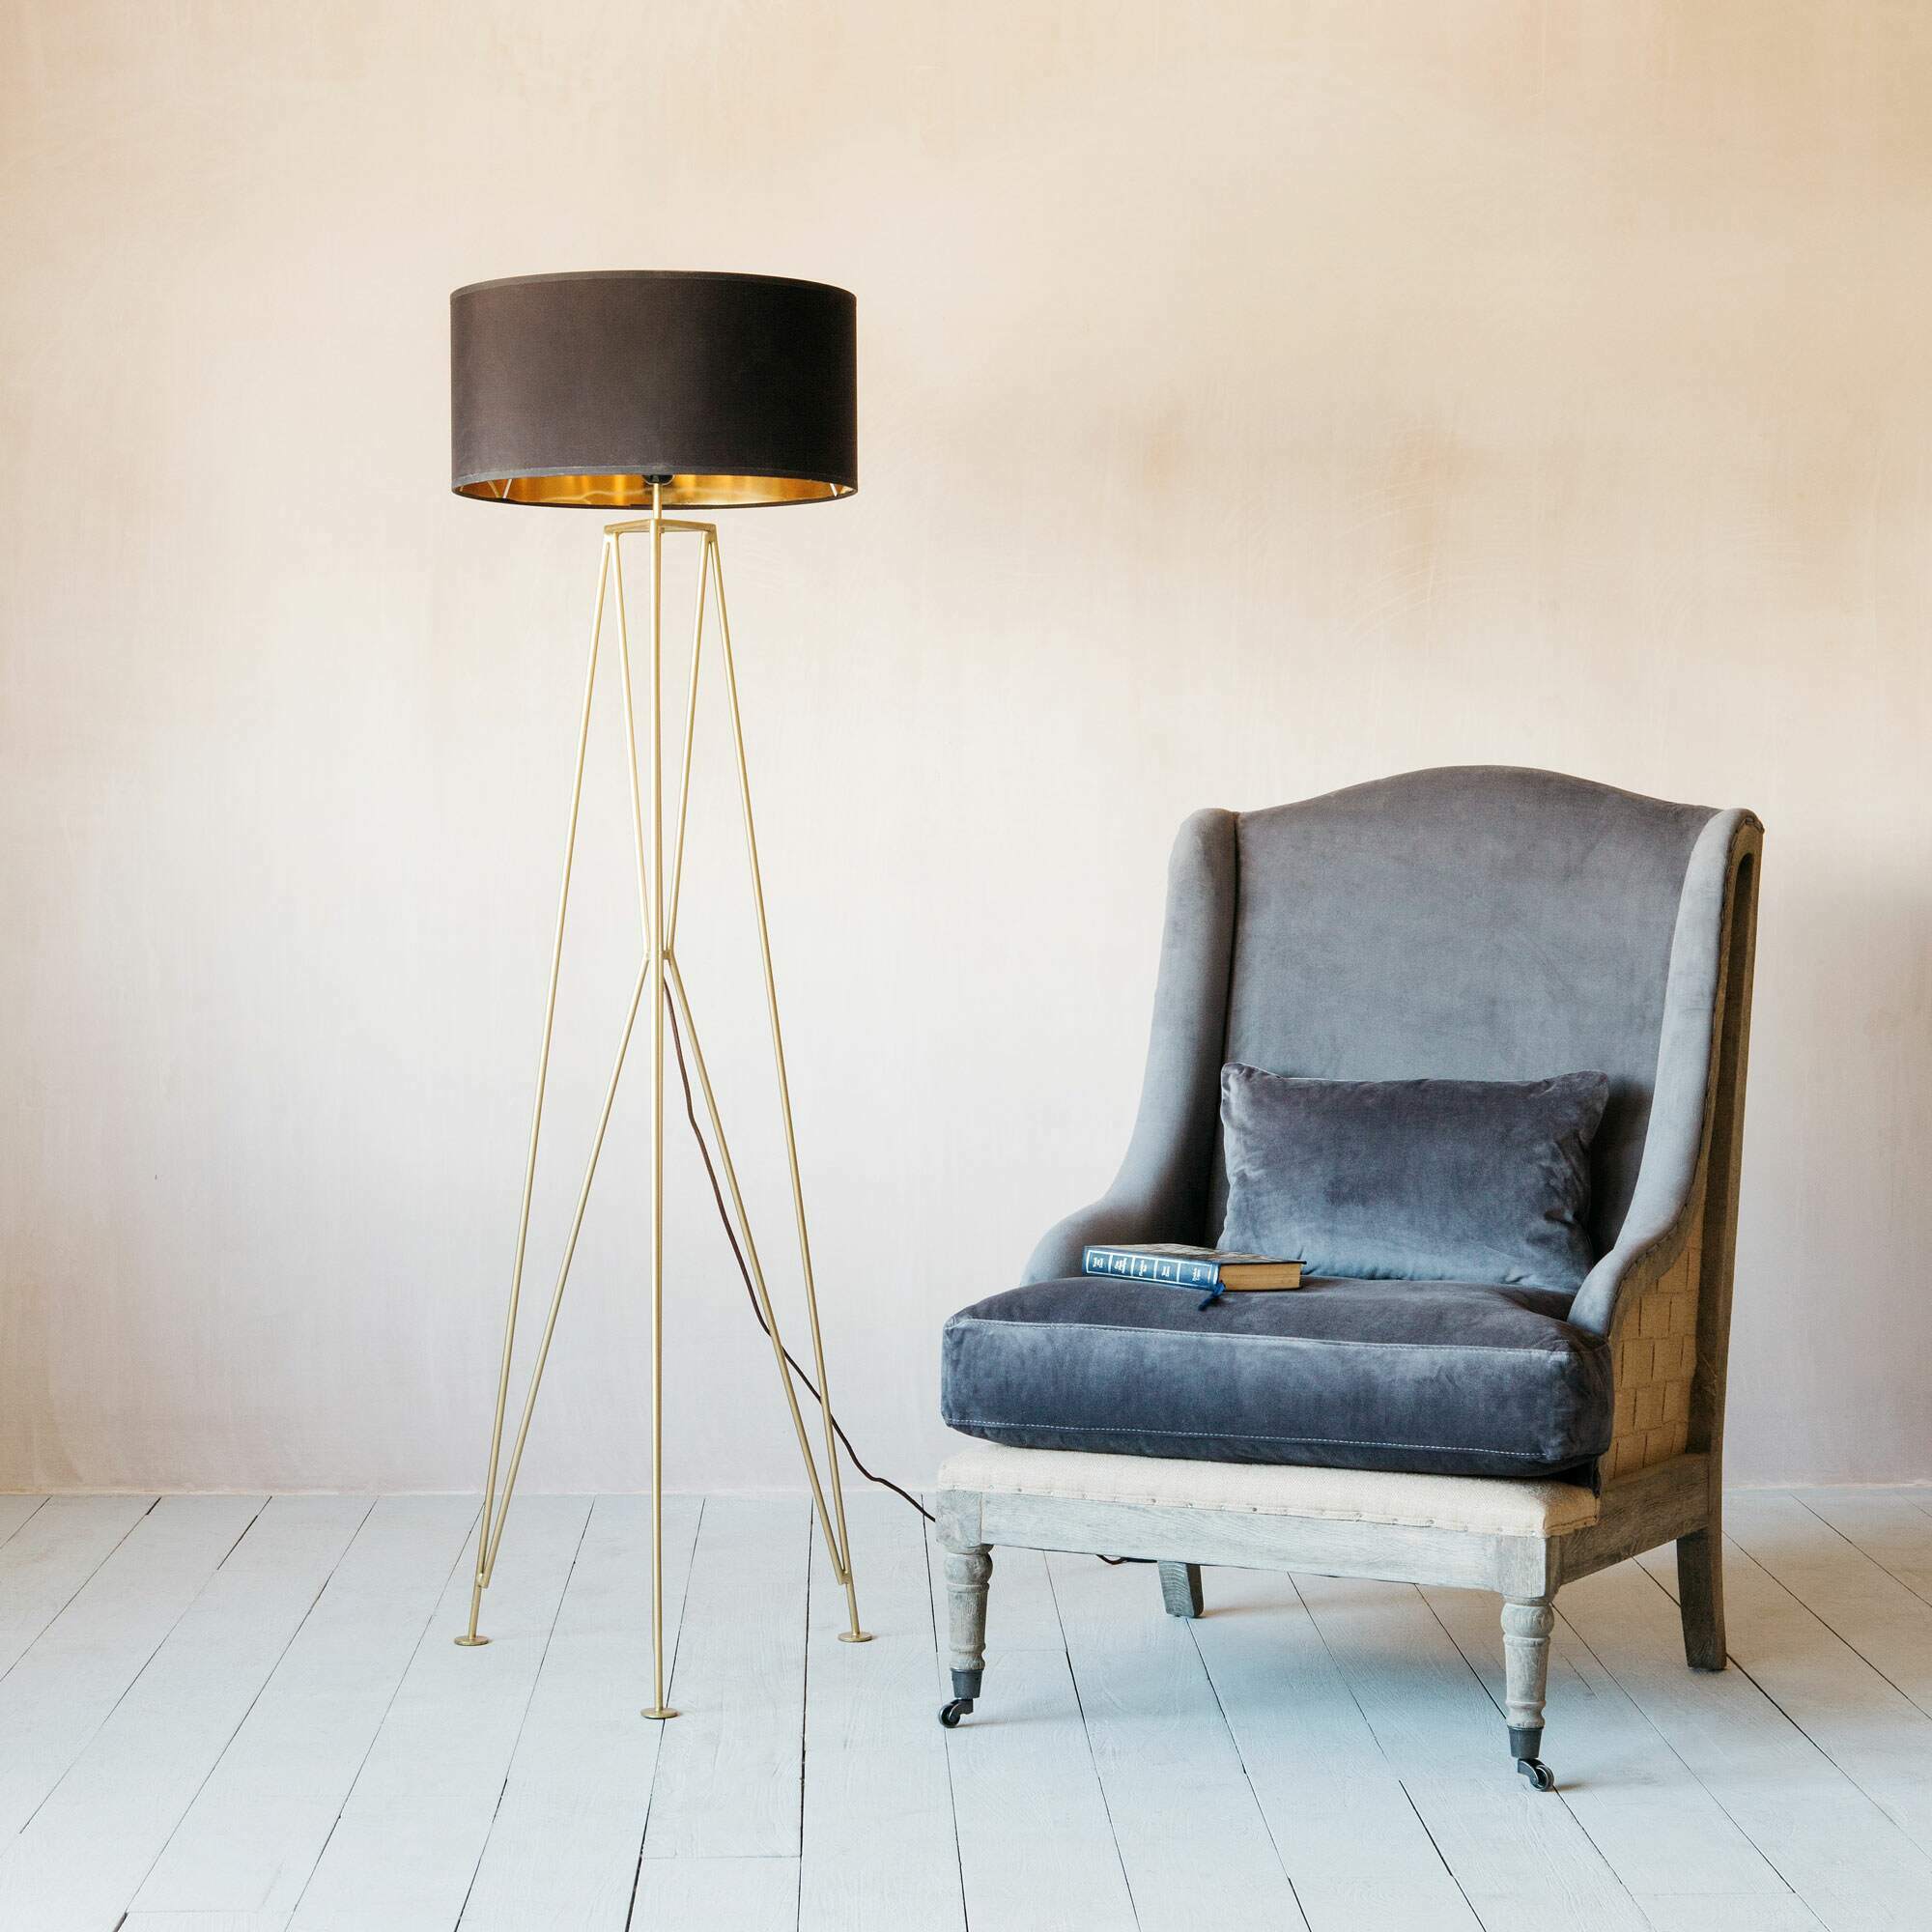 Read more about Graham and green maxwell gold tripod floor lamp